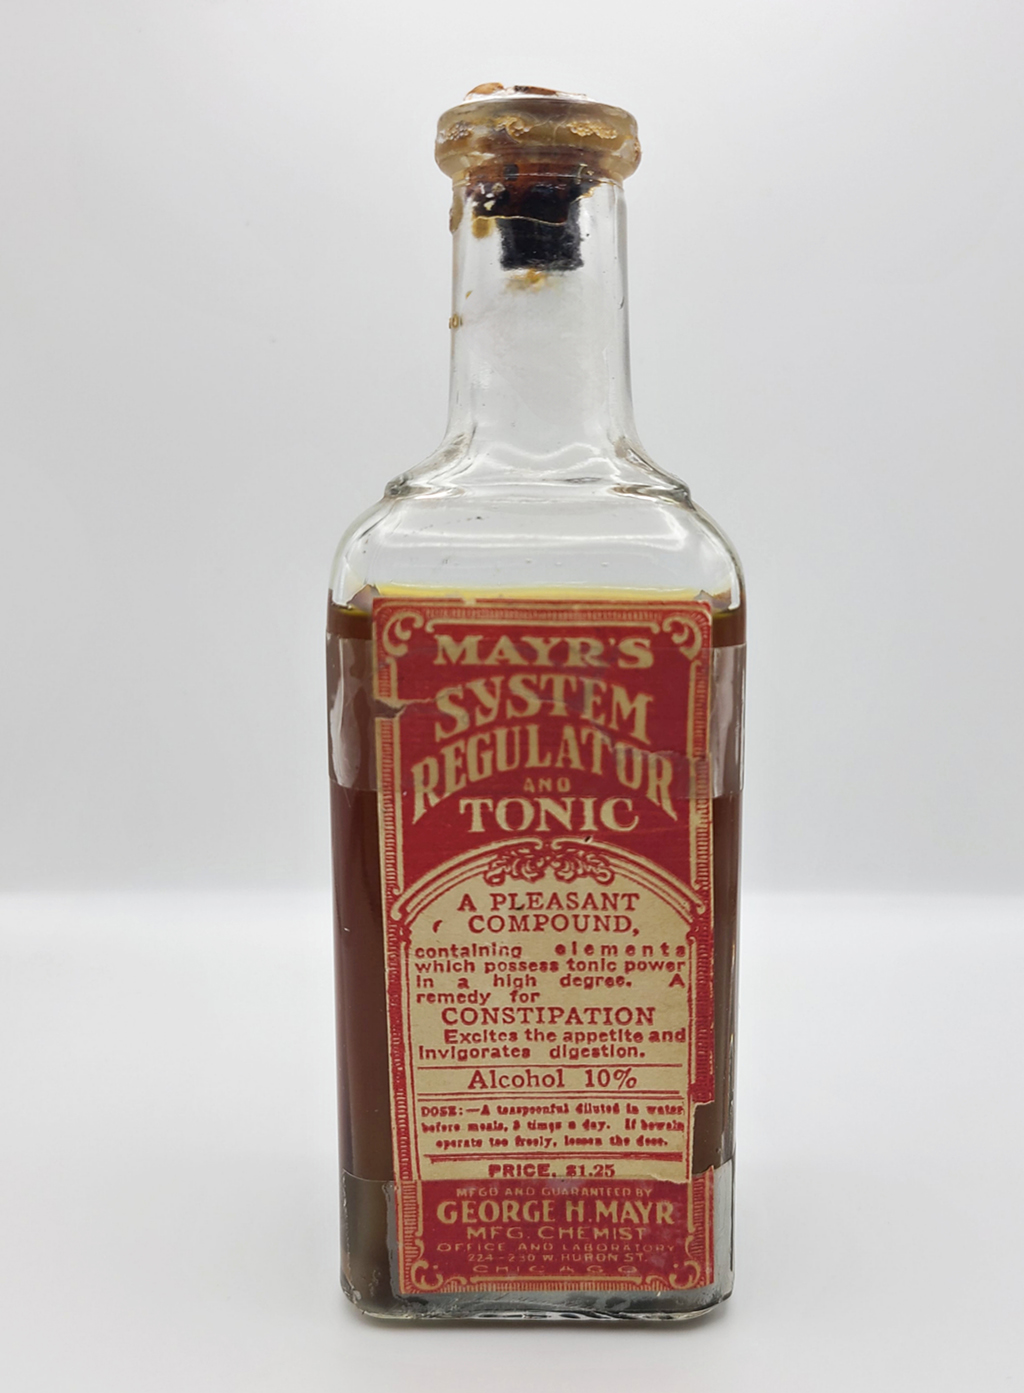 A bottle filled with brown liquid holds the label: "Mayr's System Regulator and Tonic"